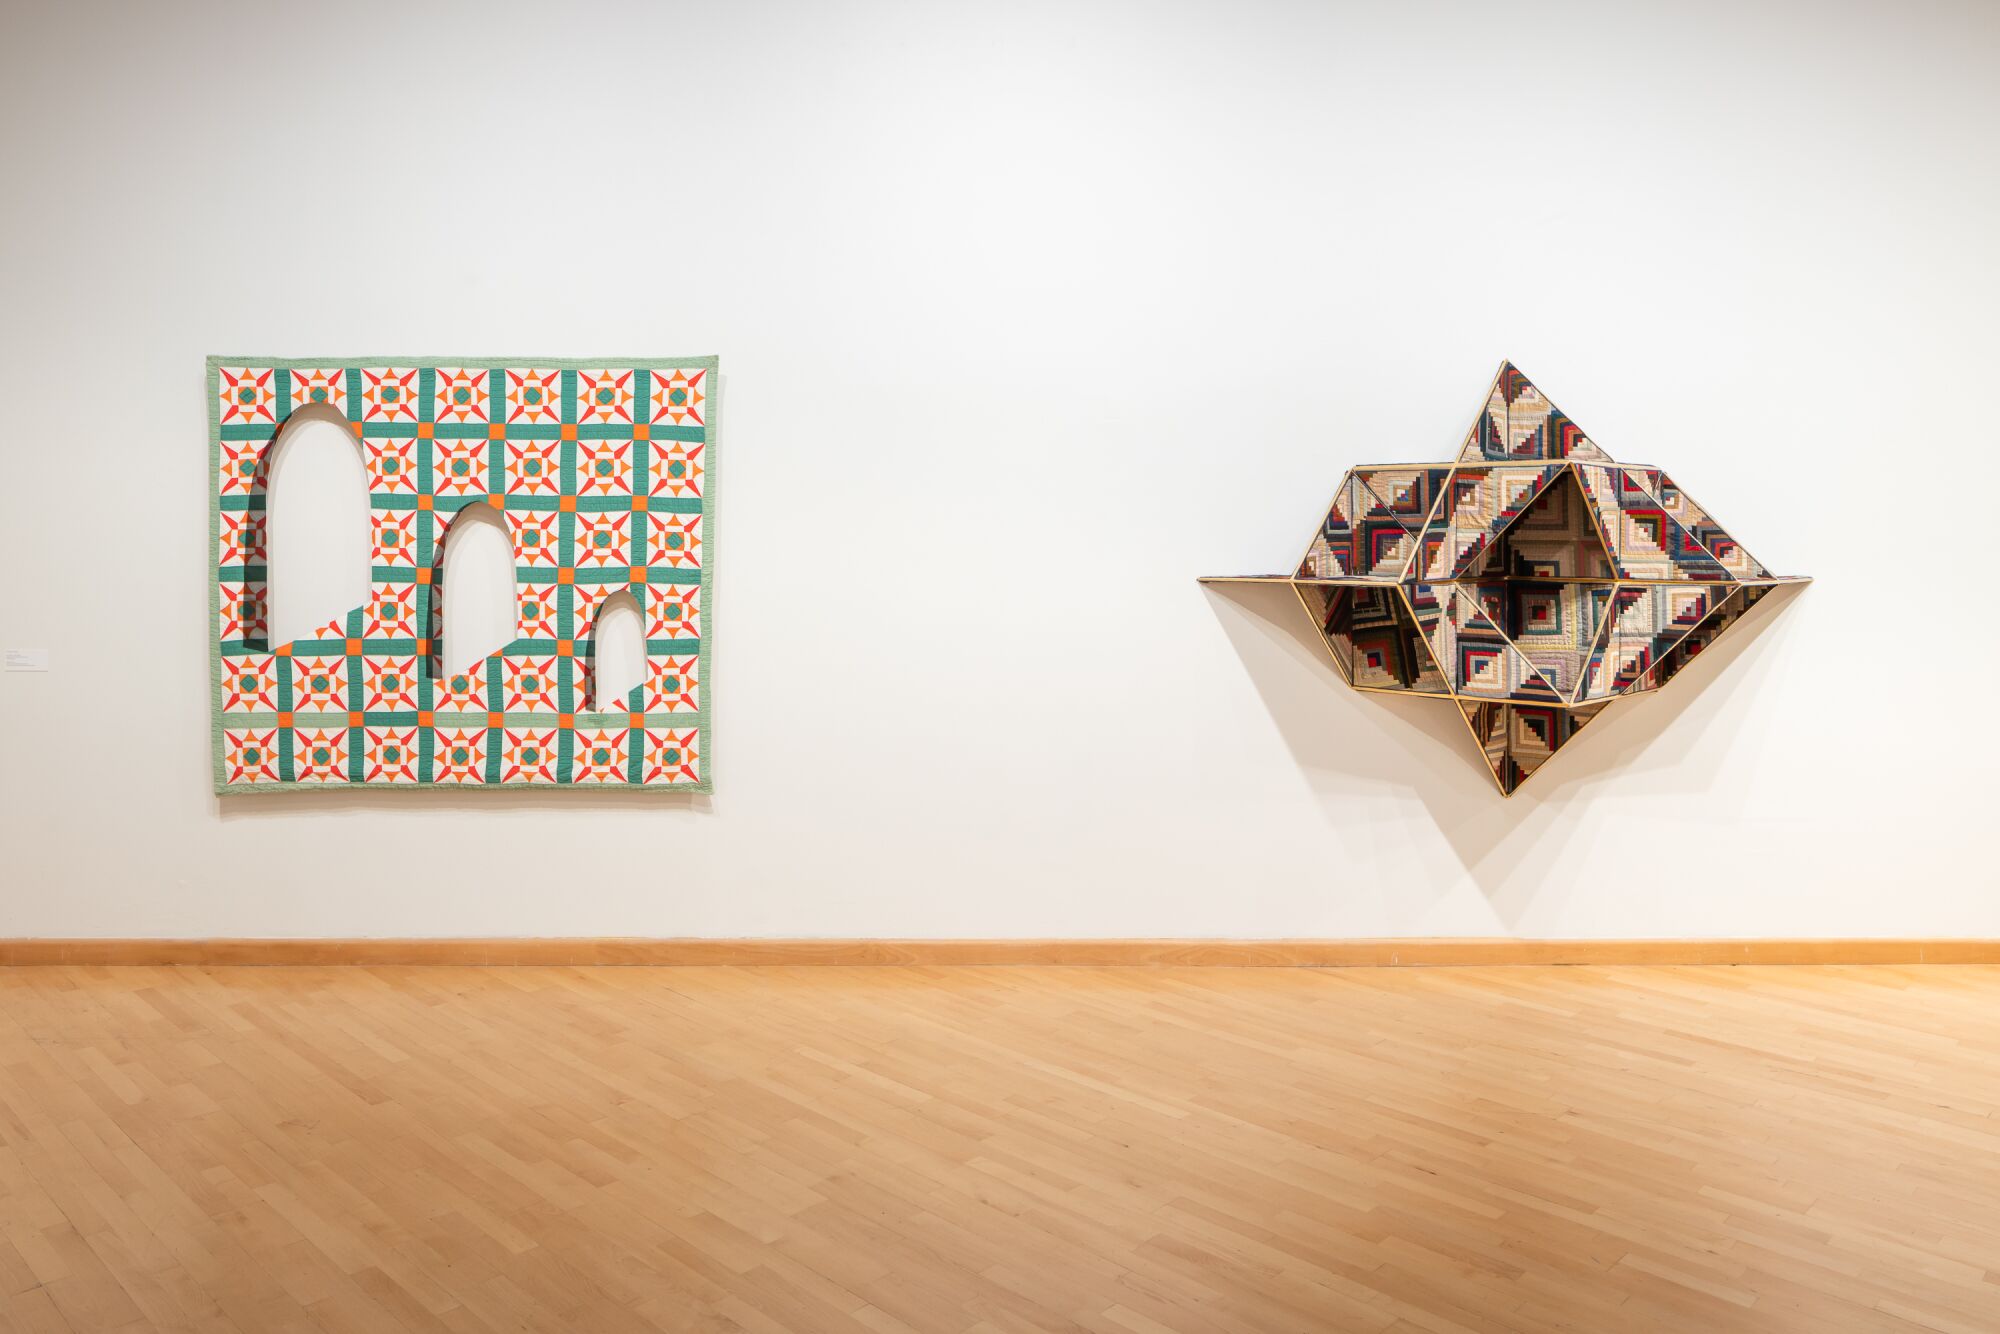 A gallery shows works made with quilts: one features a series of arched cutouts, the other looks like a space ship